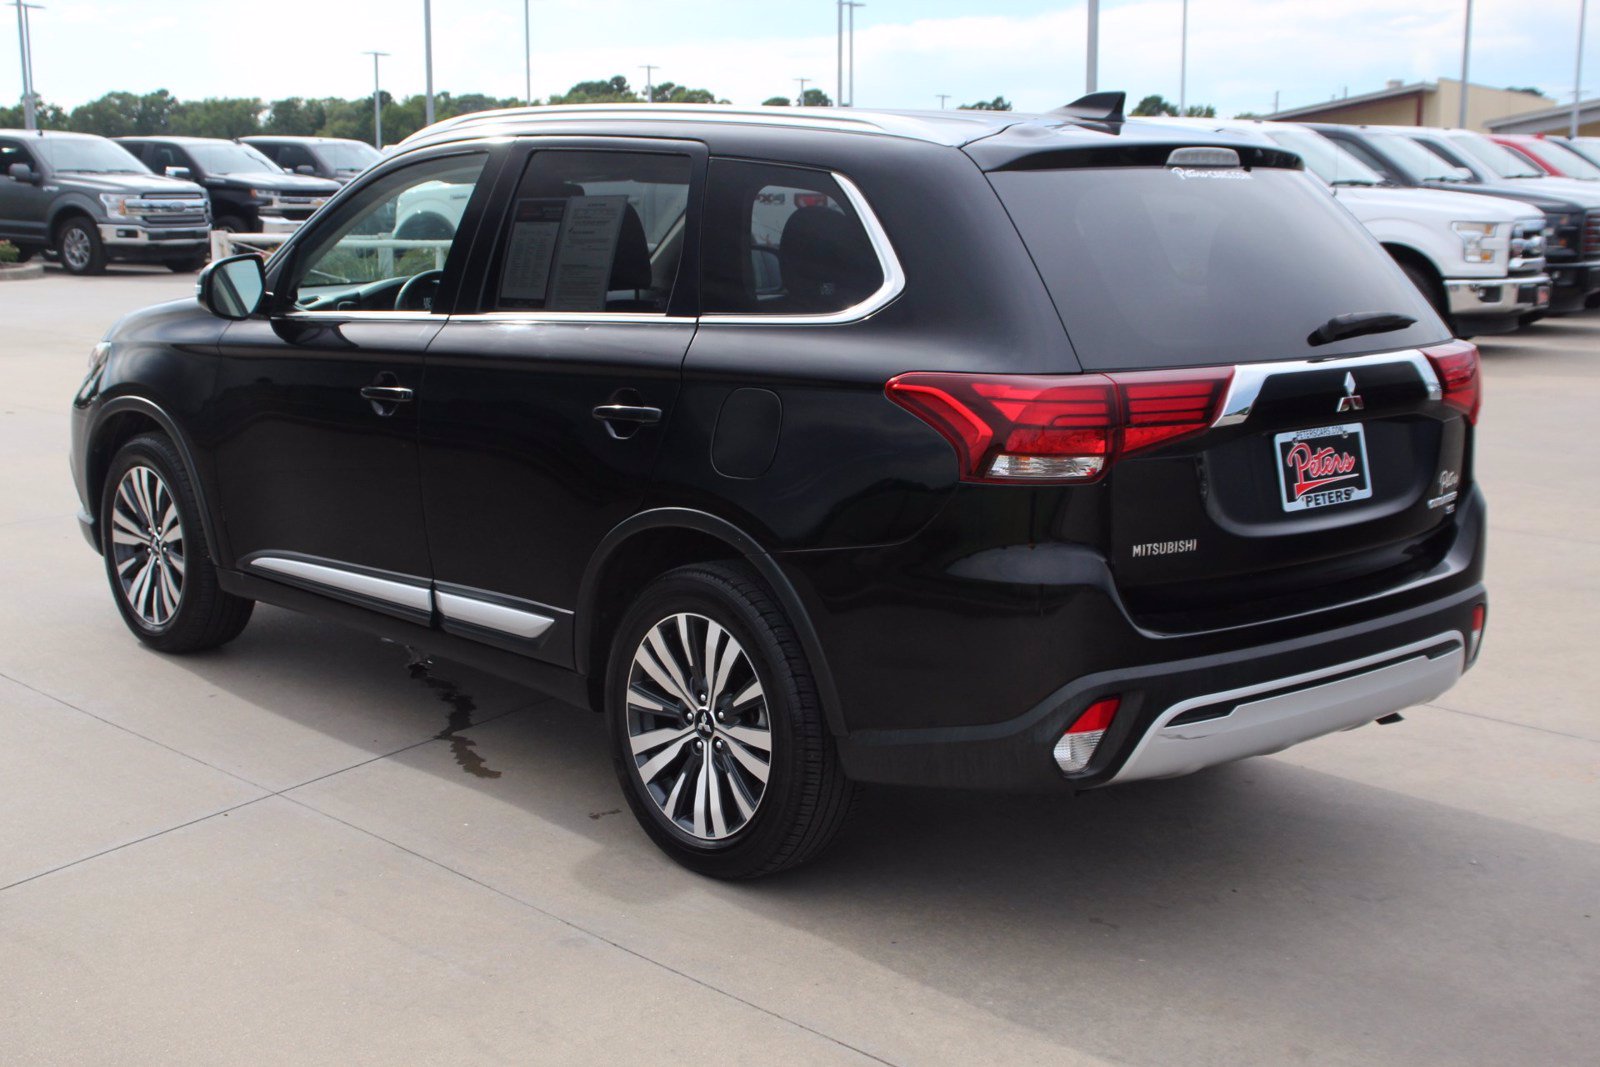 Pre-Owned 2019 Mitsubishi Outlander SE SUV in Longview #10028P | Peters ...